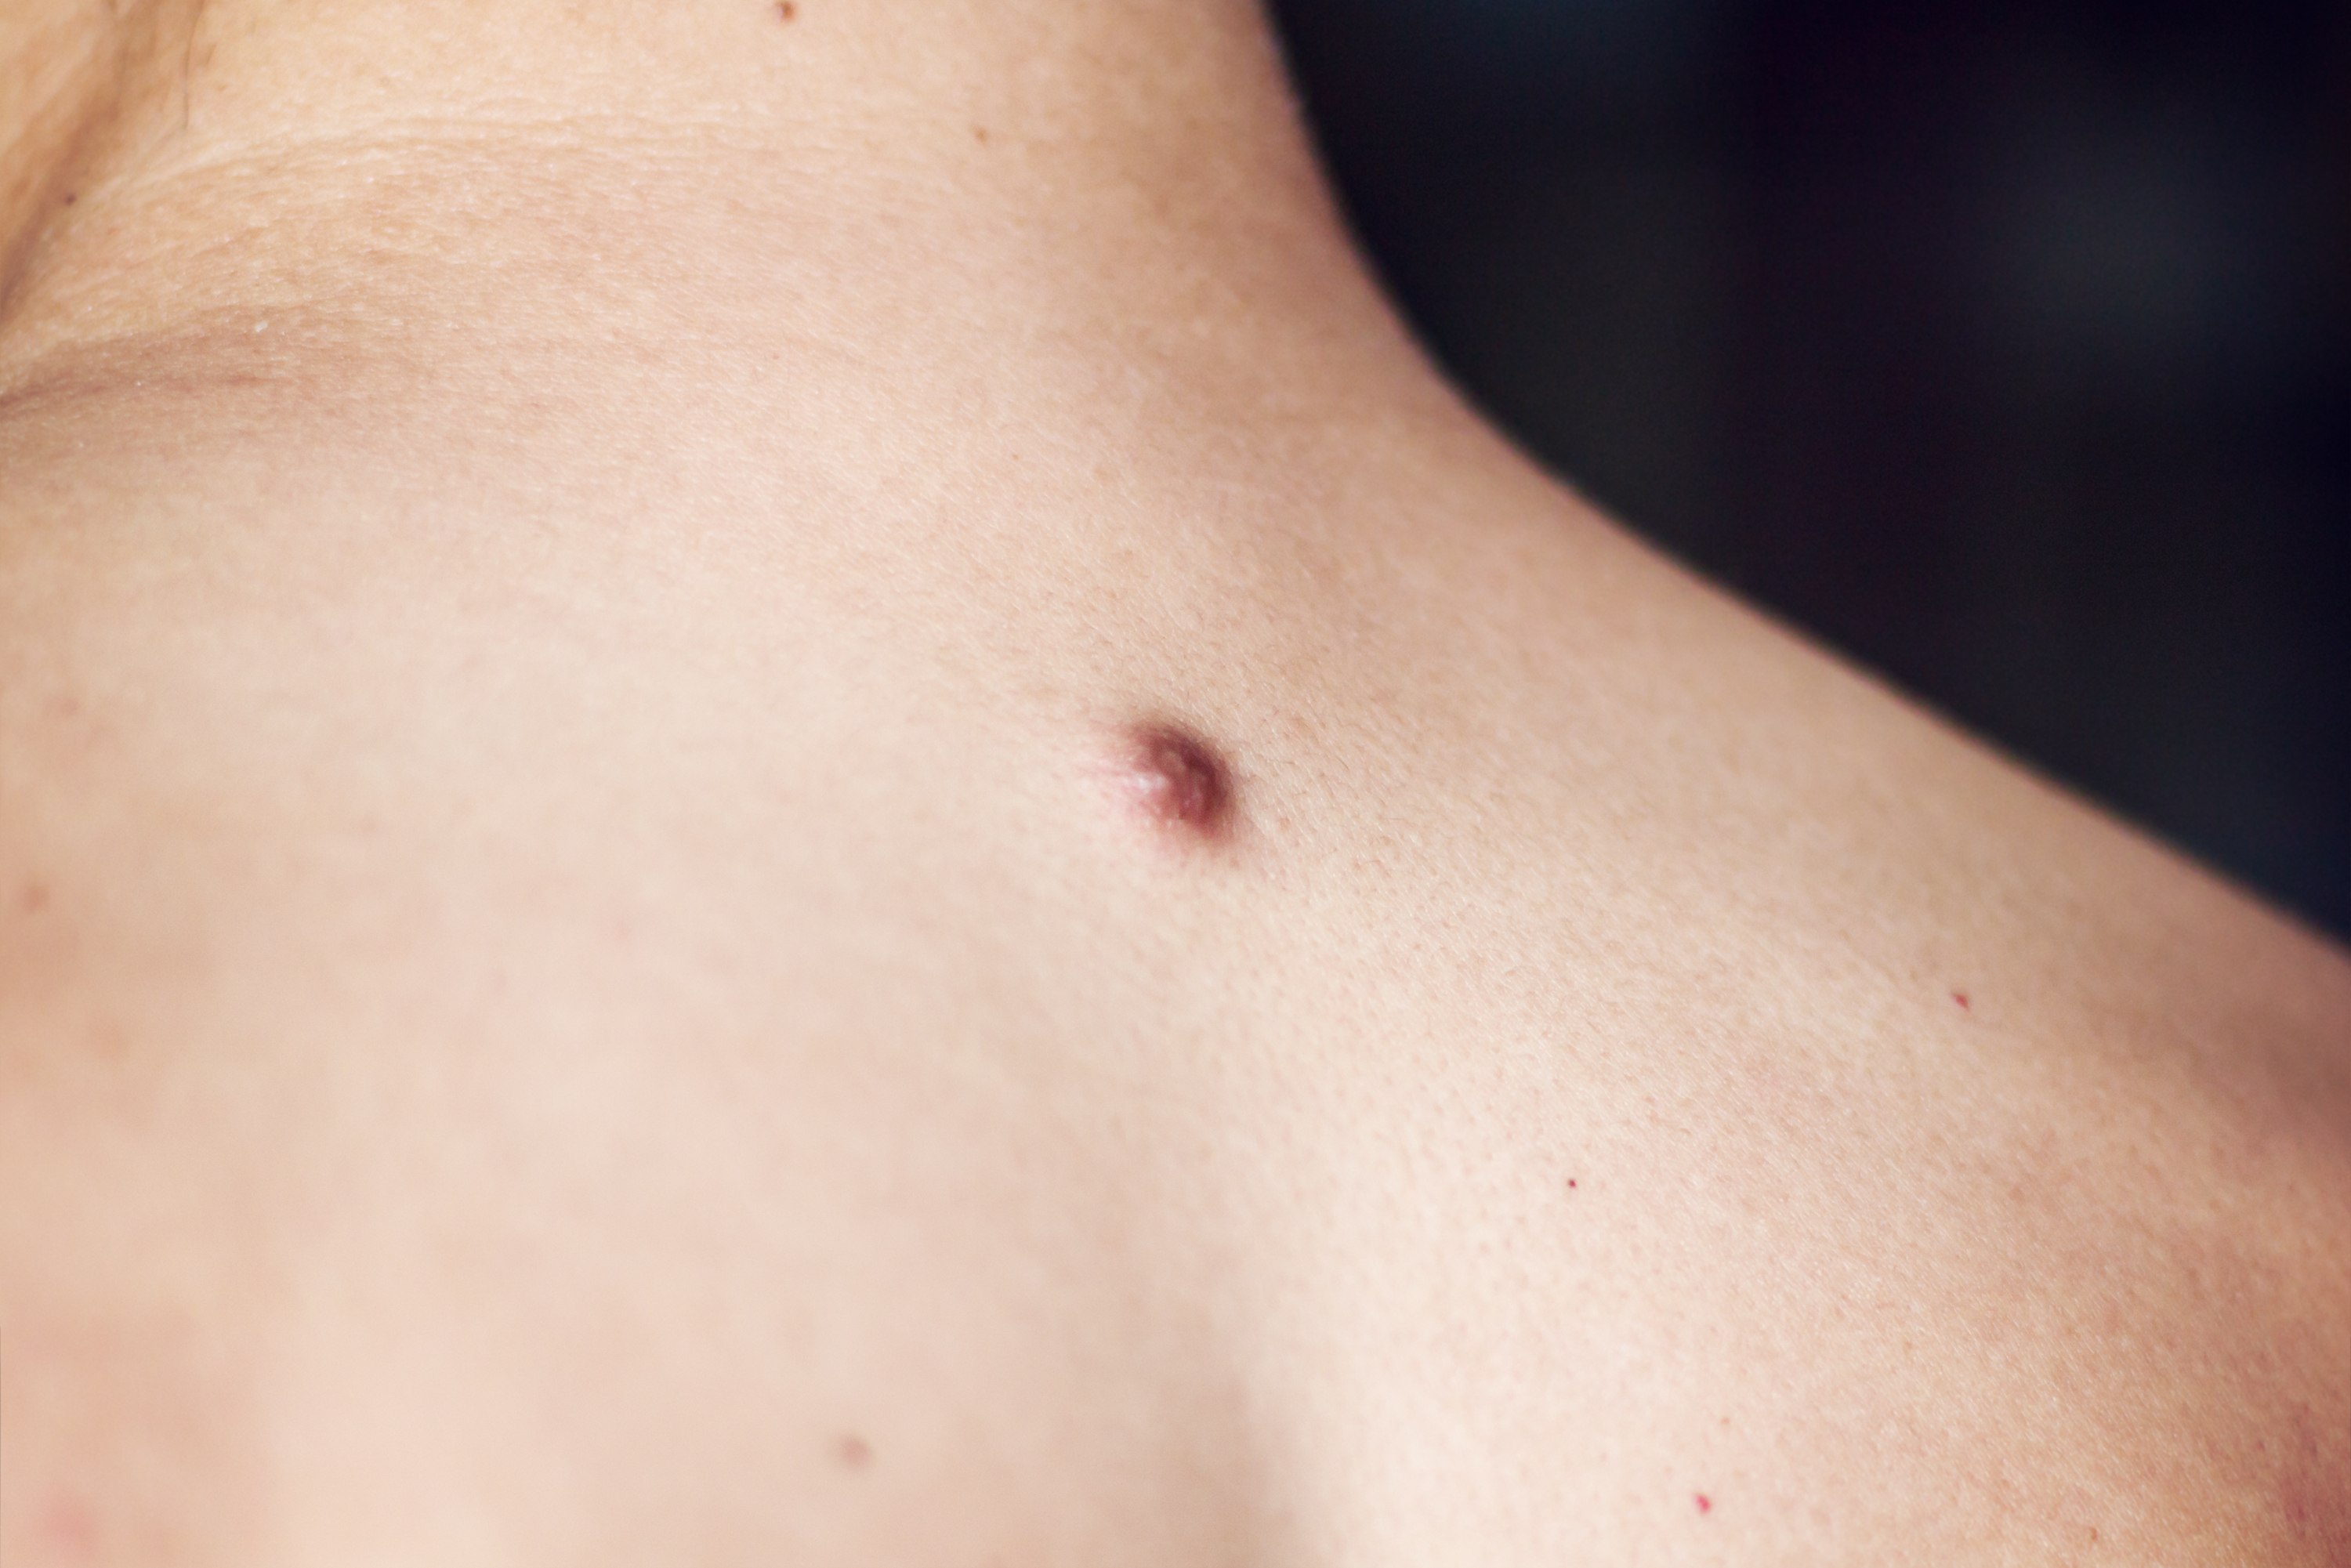 Reddened pimple on a person's back | Source: Shutterstock